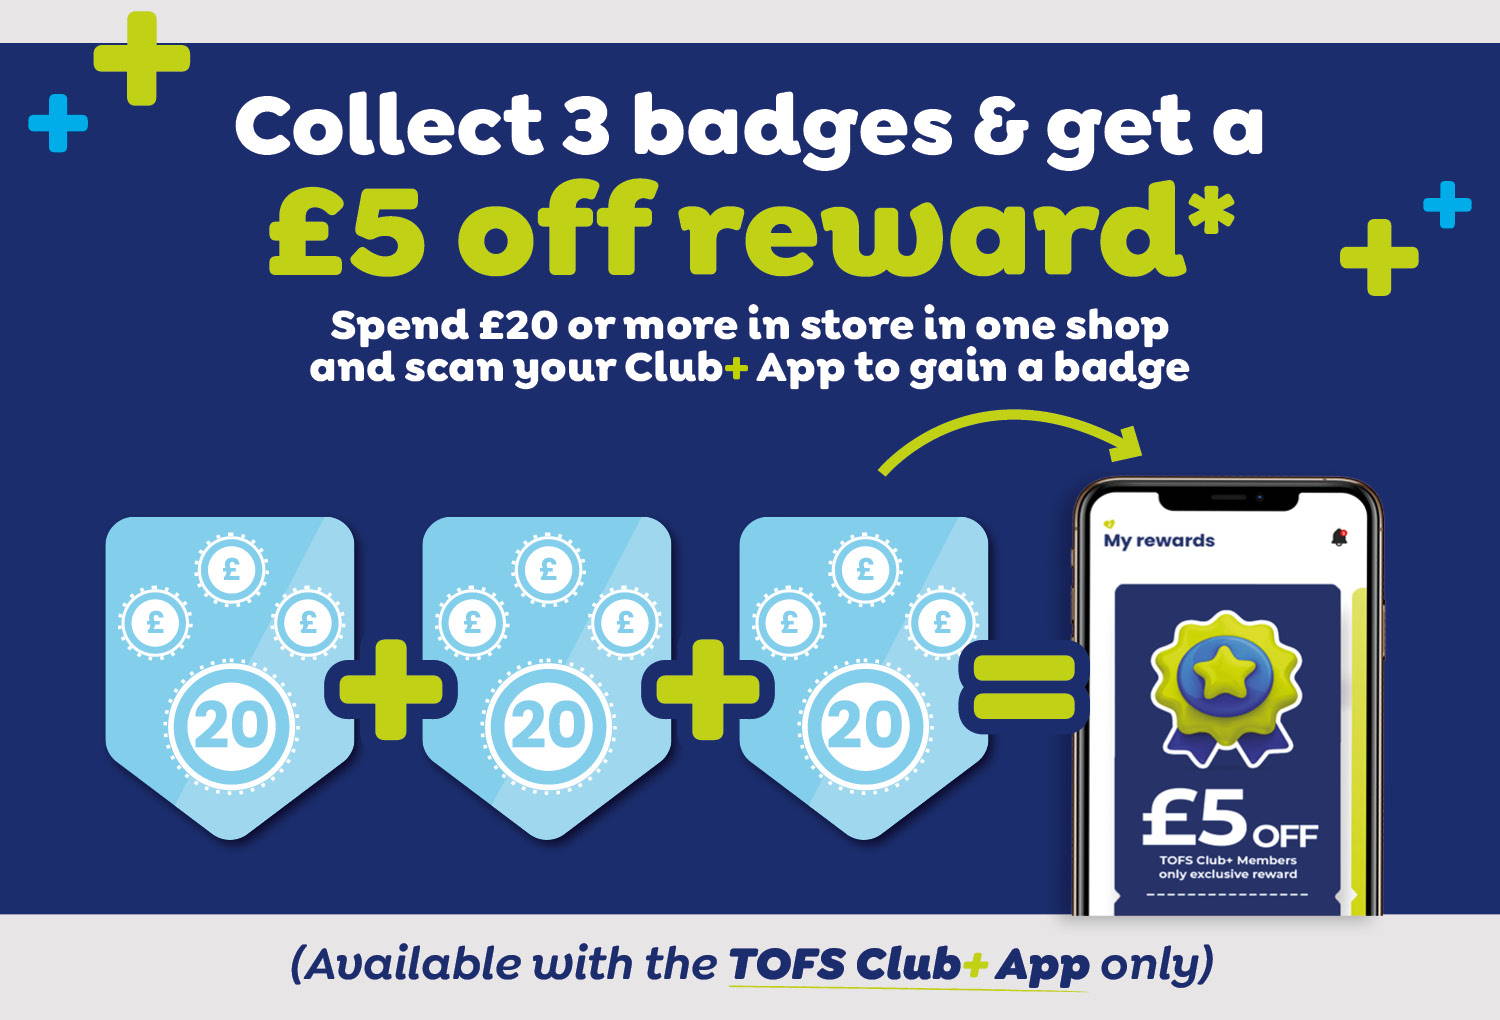 Collect 3 badges & get a £5 off reward*. Spend £20 or more in store in one shop and scan your Club+ App to gain a badge - available with TOFS Club+ App only